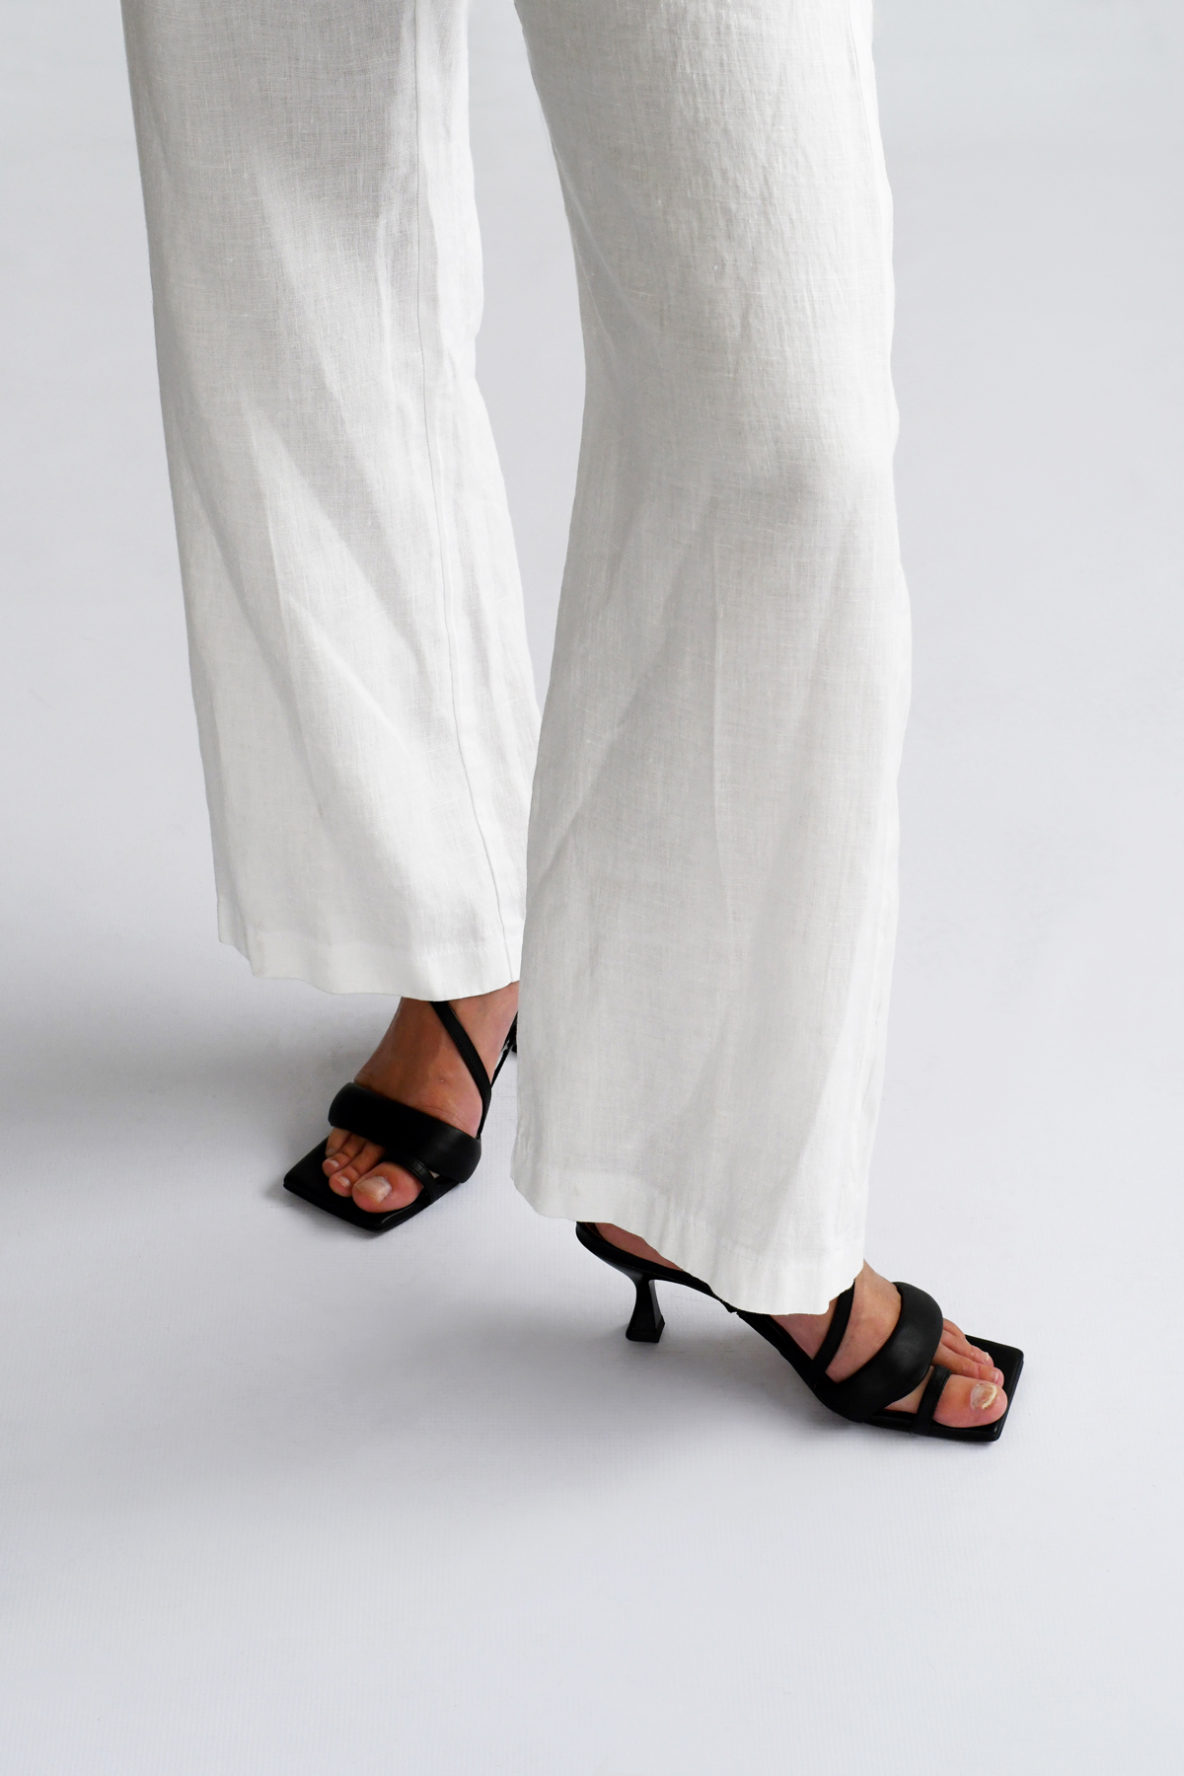 Linen palazzo pants is a must-have in every woman's cupboard.